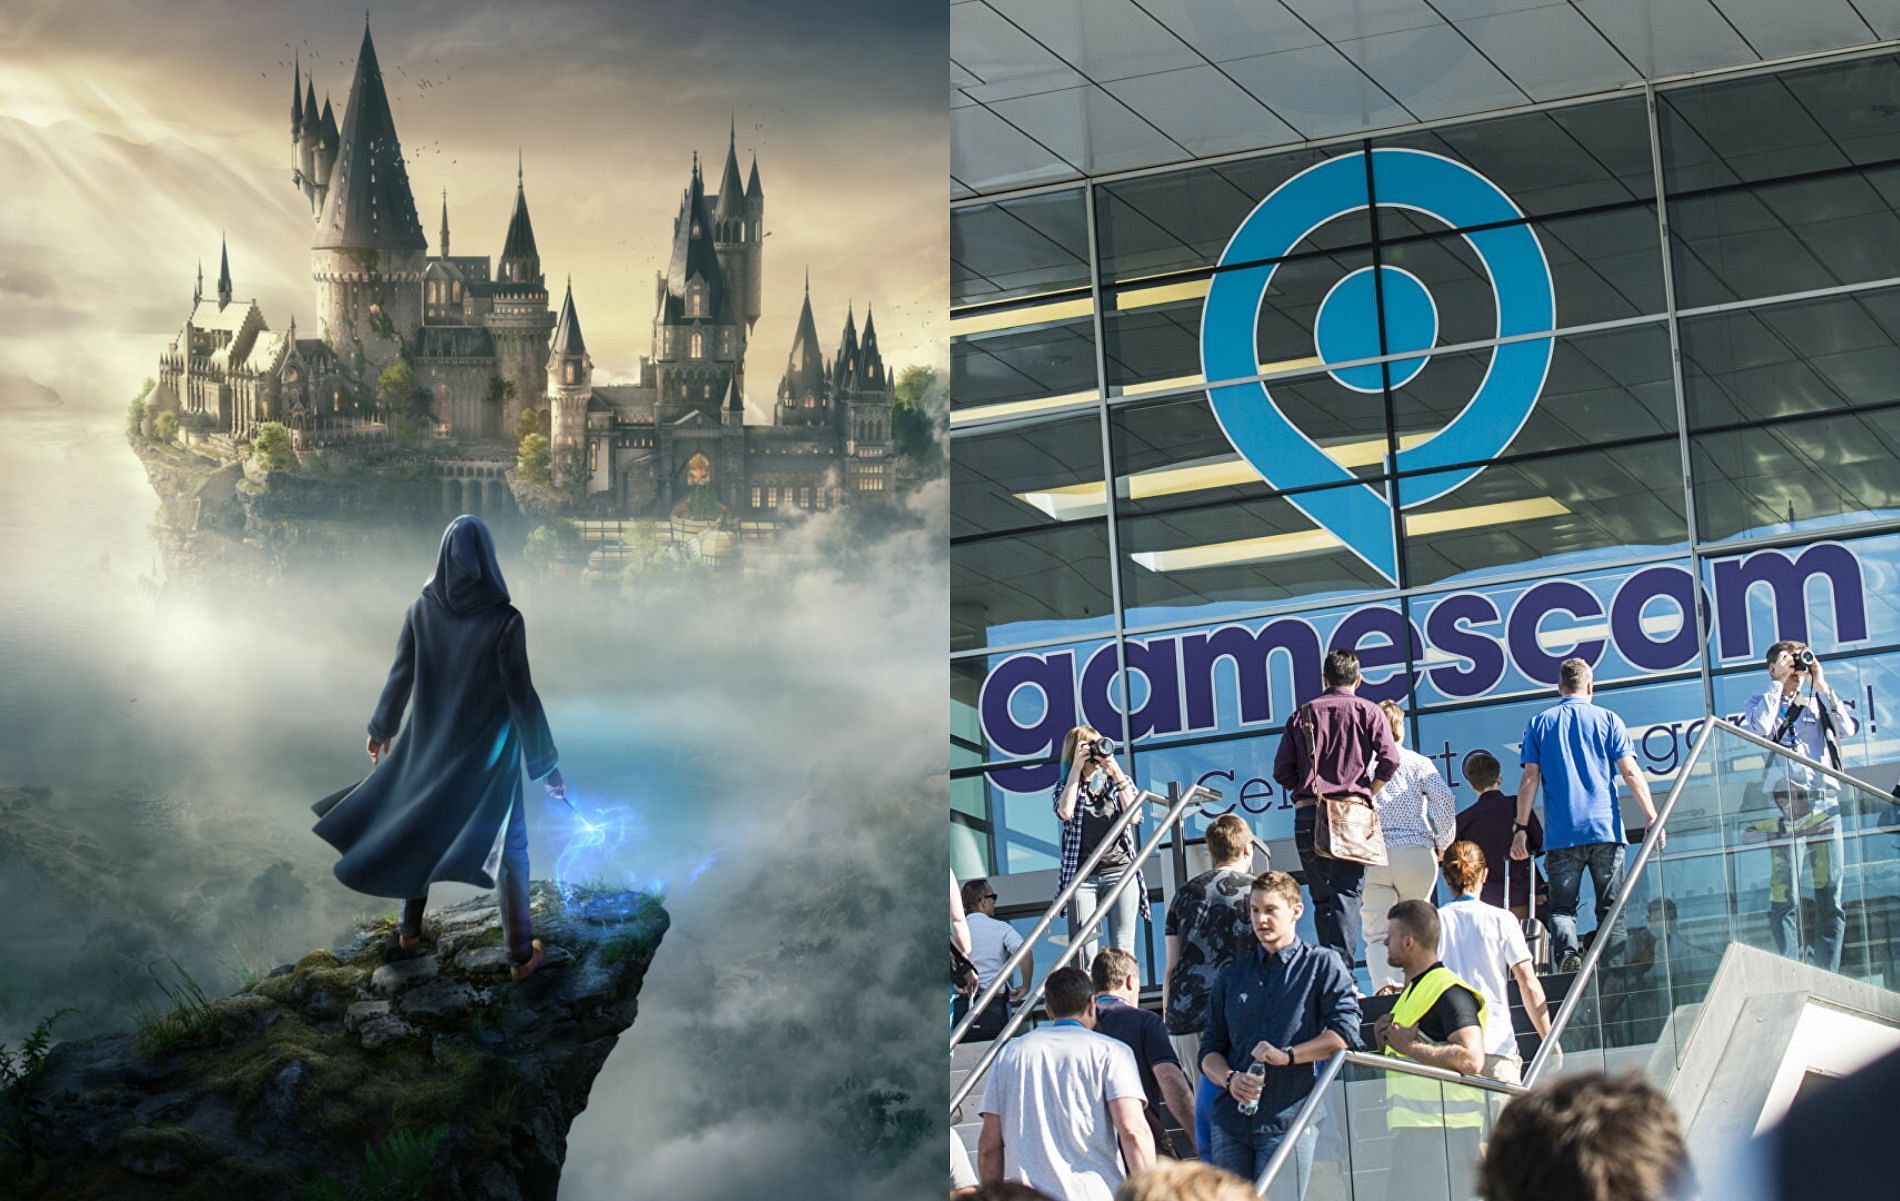 Fans can expect to see more of the upcoming Wizarding World adventure before release next year (Images via Warners Bros Interactive Entertainment/Gamescom)